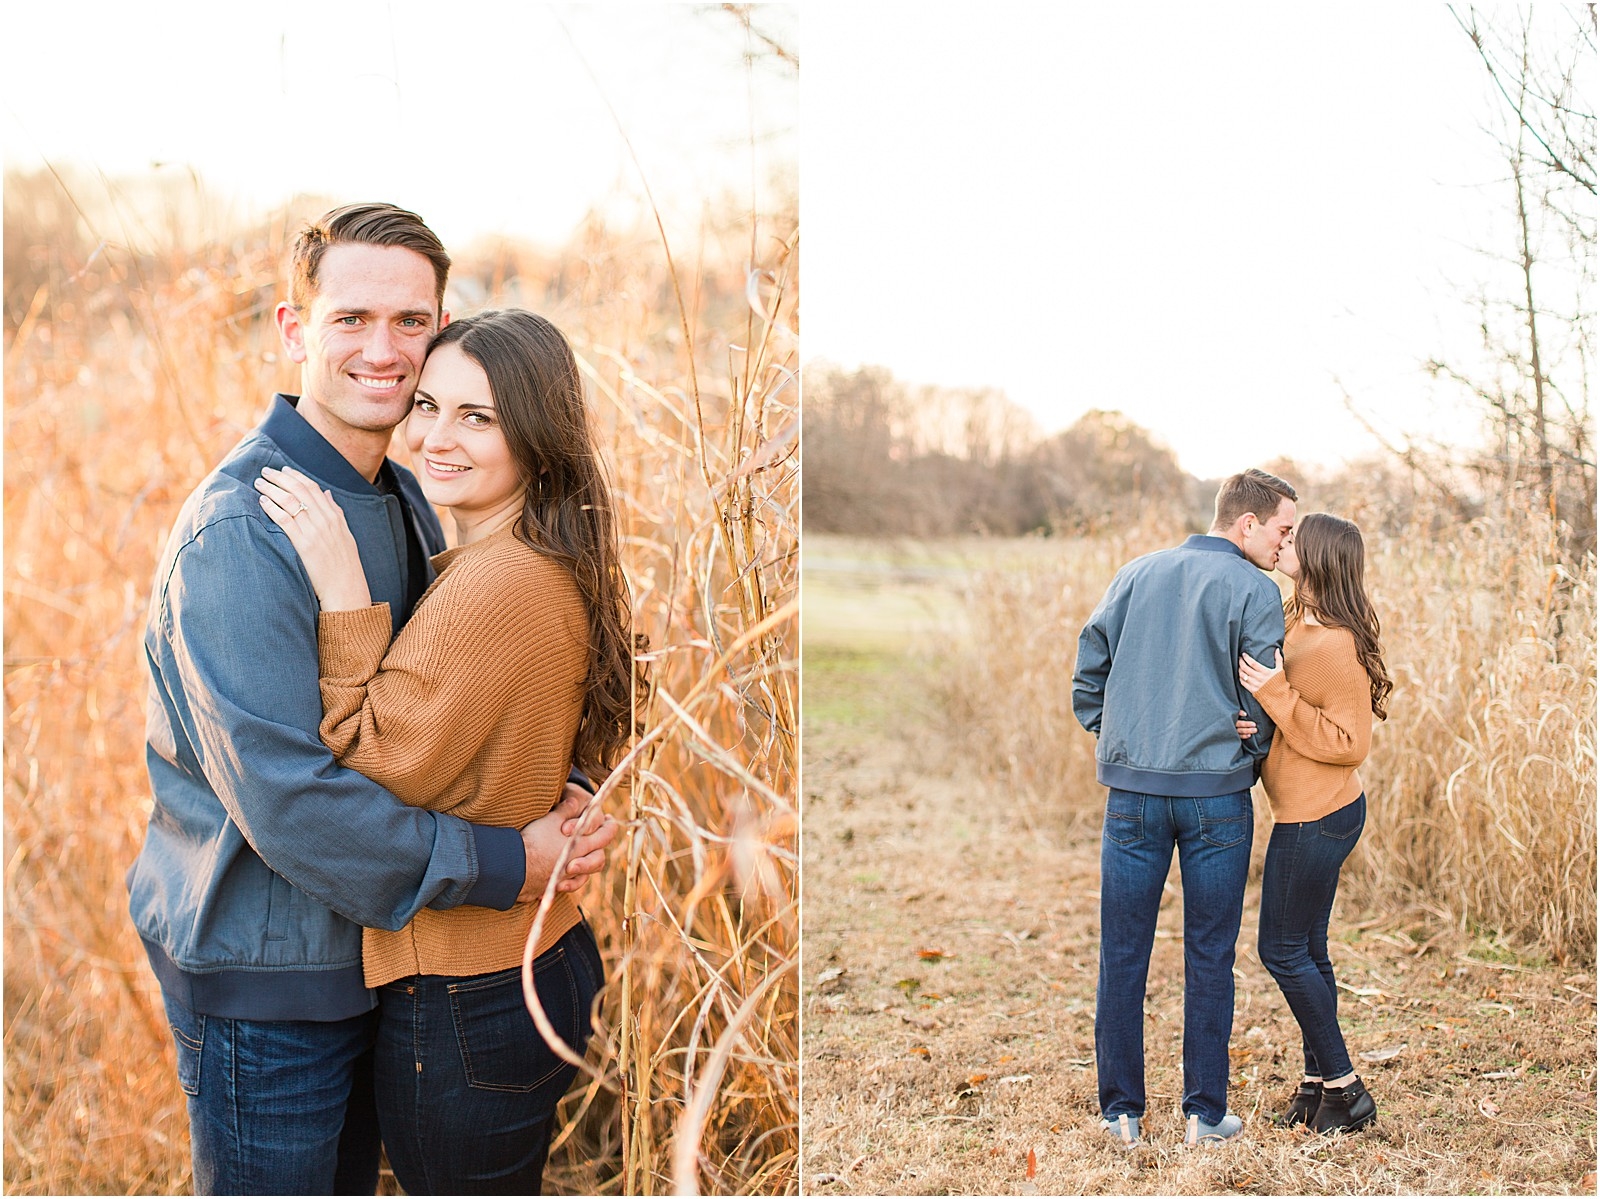 Kaley and Devon's fall Evansville Indiana engagement session. | #fallengagementsession #evansvilleindiana #evansvilleindianawedding | 0037.jpg